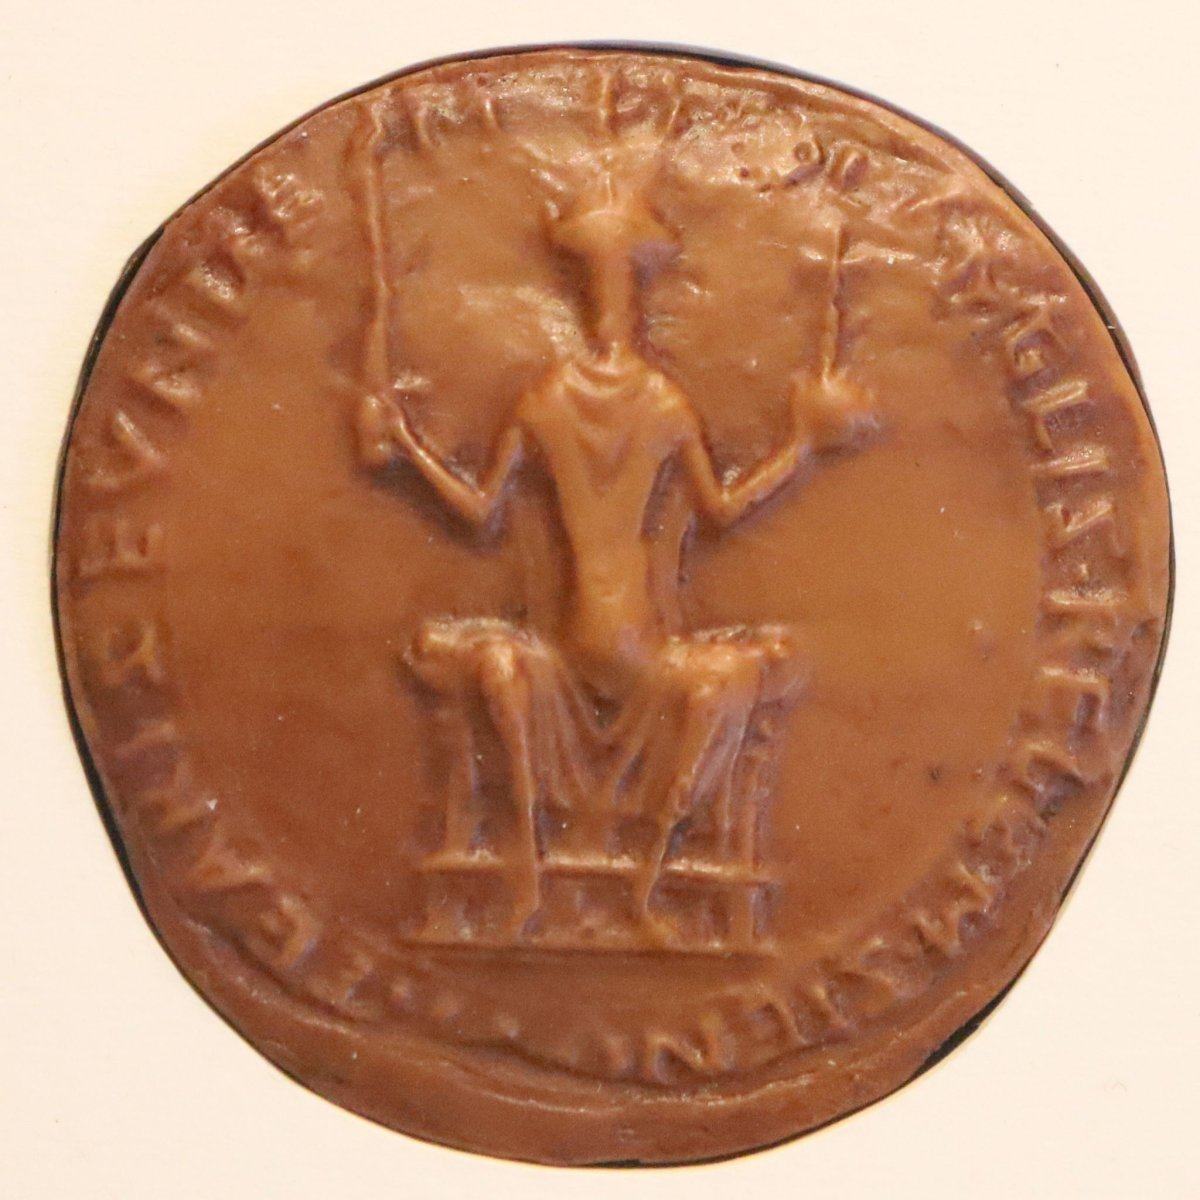 A Royal seal from the 1067 William Charter for the City of London